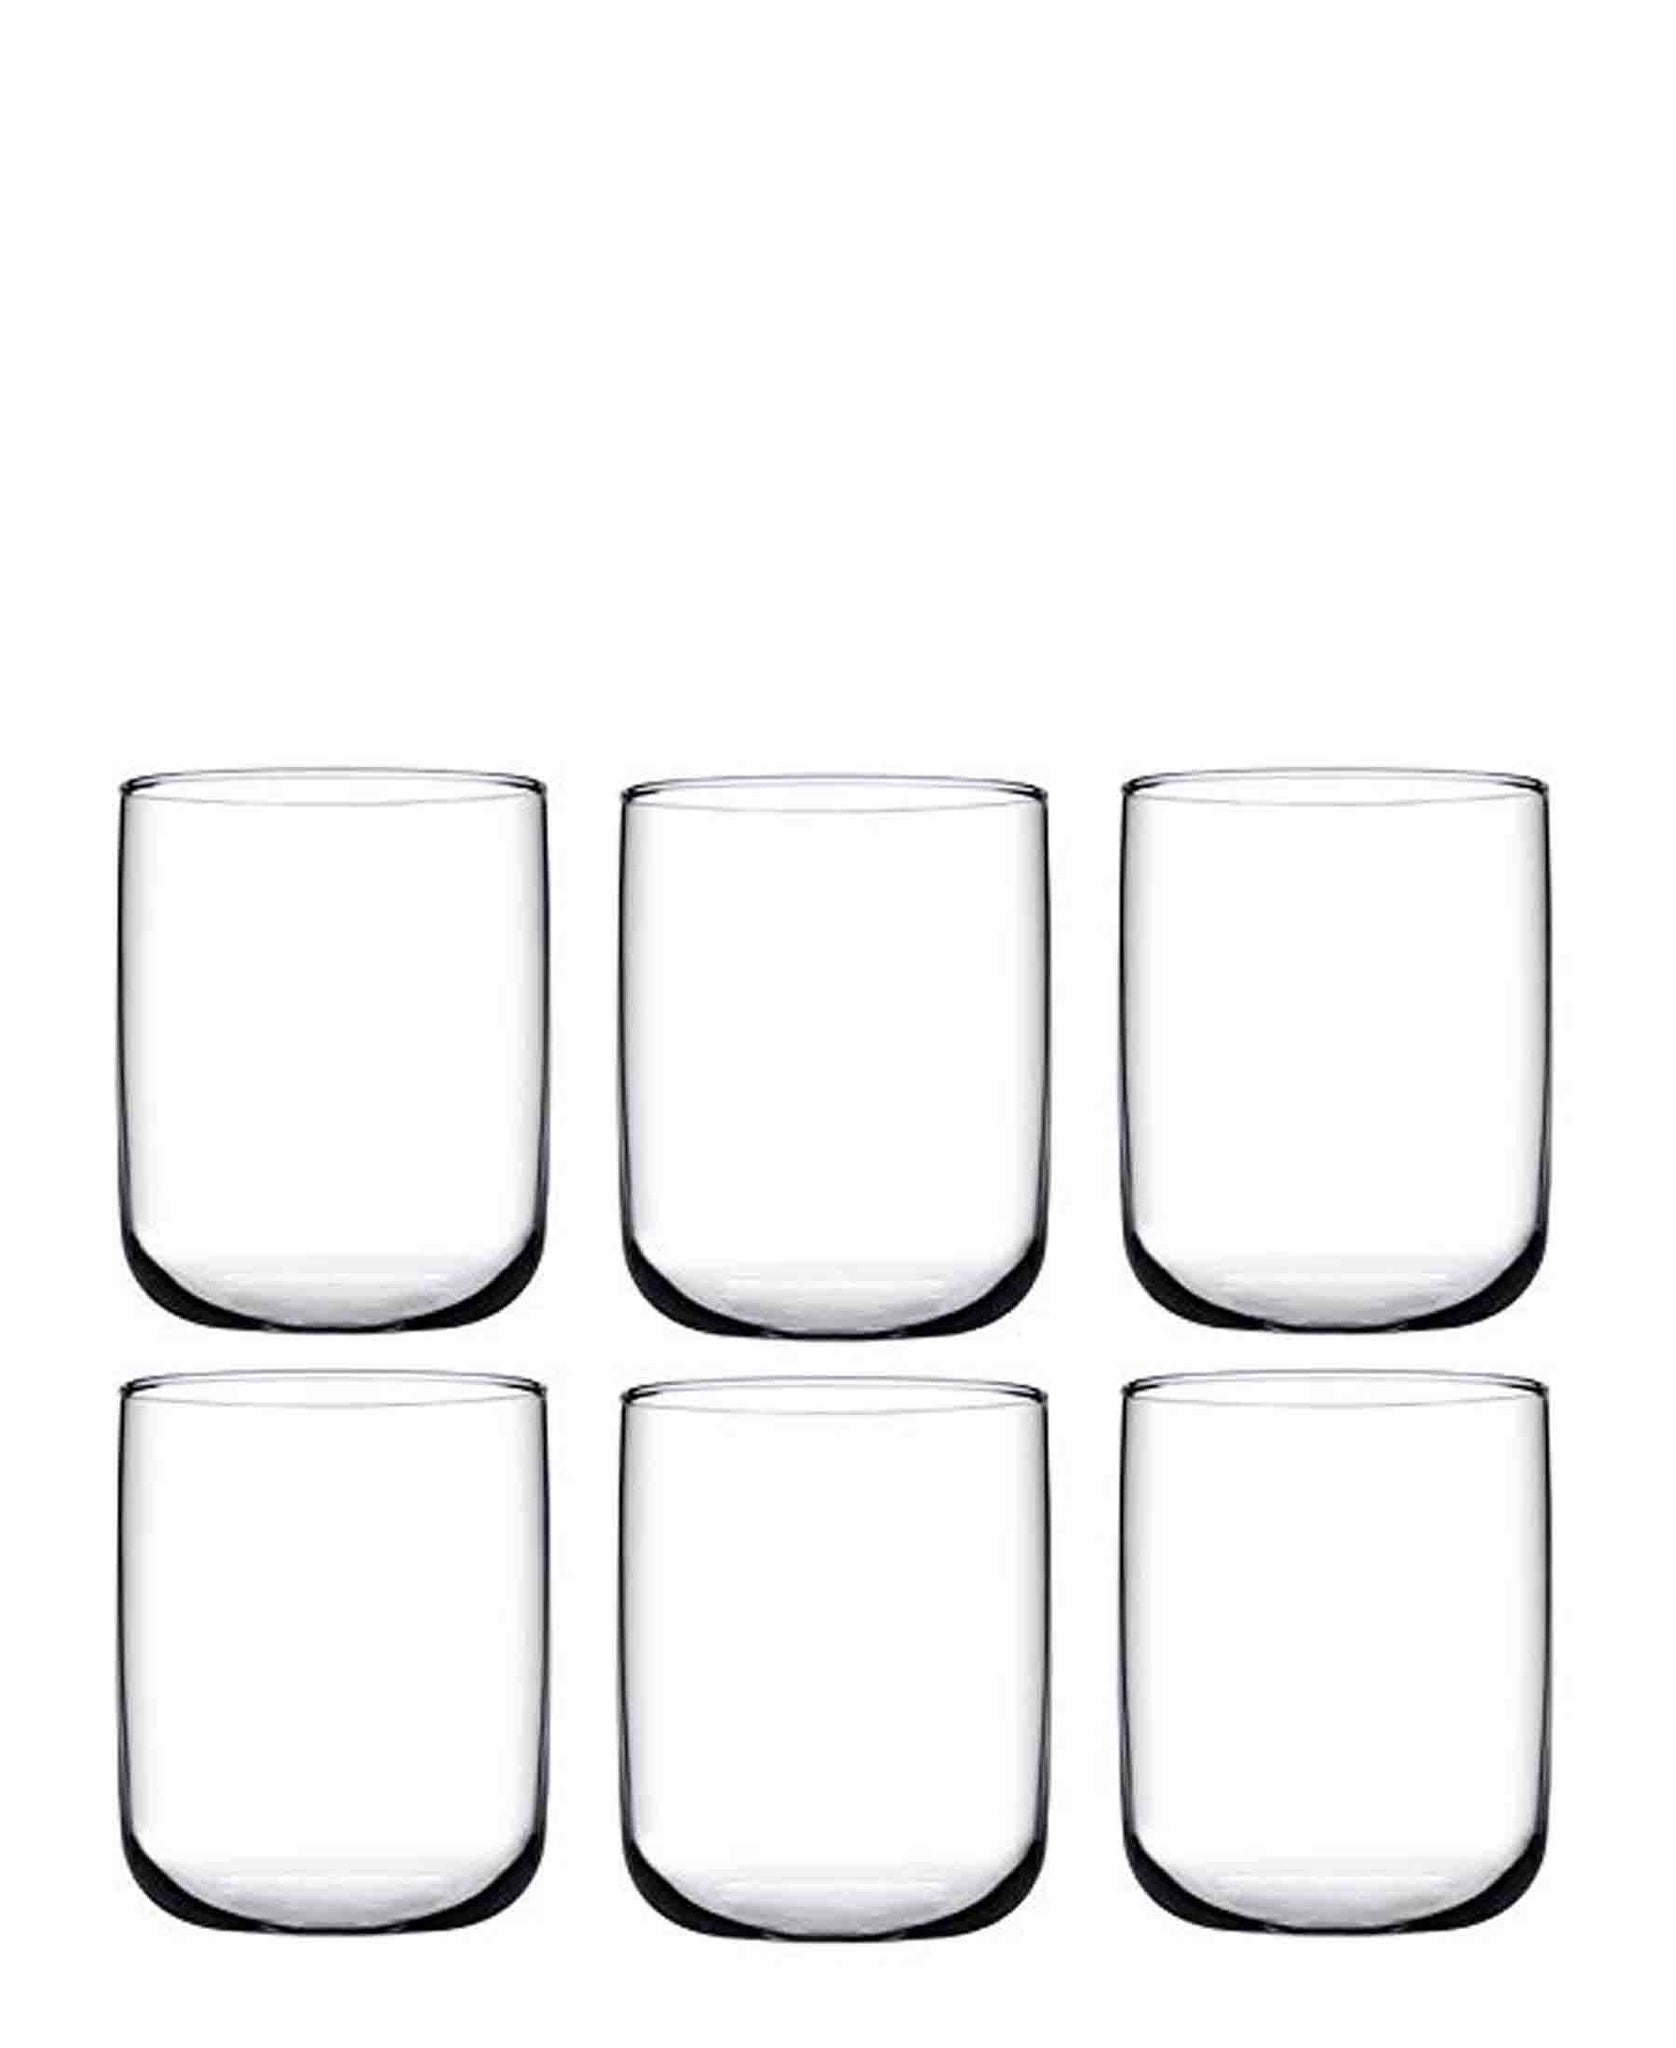 Pasabahce 6 Piece 280ml Iconic Whisky Glass Set - Clear